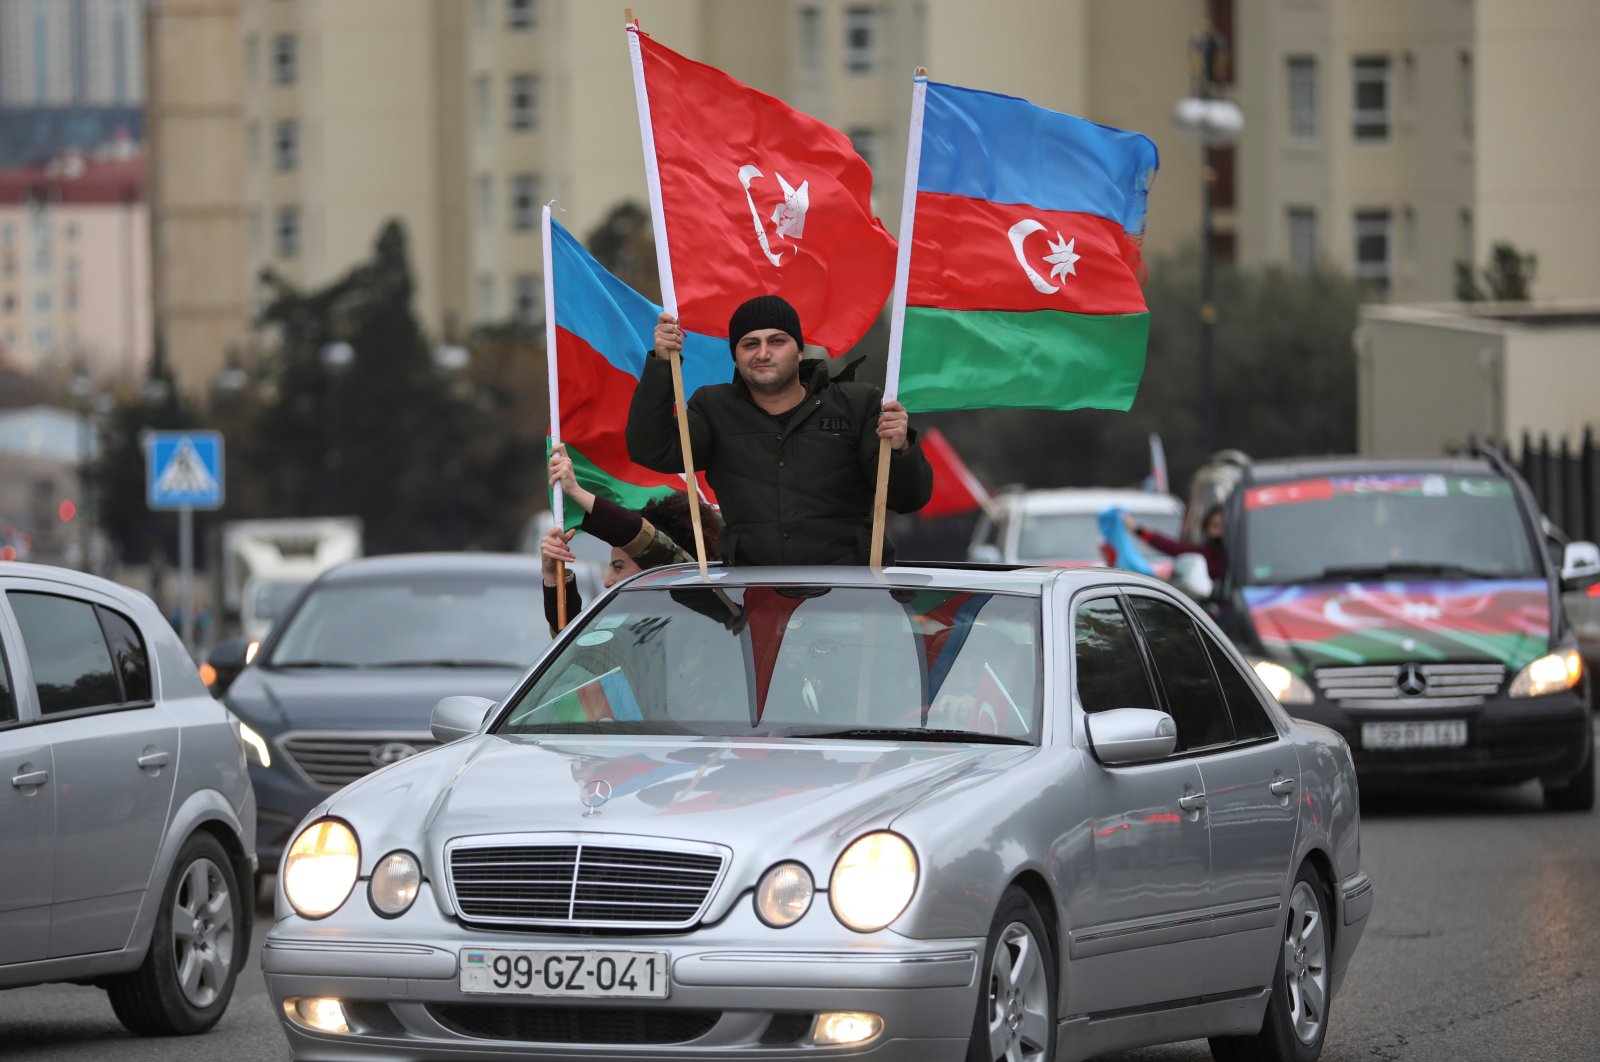 People take part in street celebrations after Azerbaijan takes control of the Lachin district in the Nagorno-Karabakh conflict, in Baku, Azerbaijan, Dec. 1, 2020. (Reuters Photo)